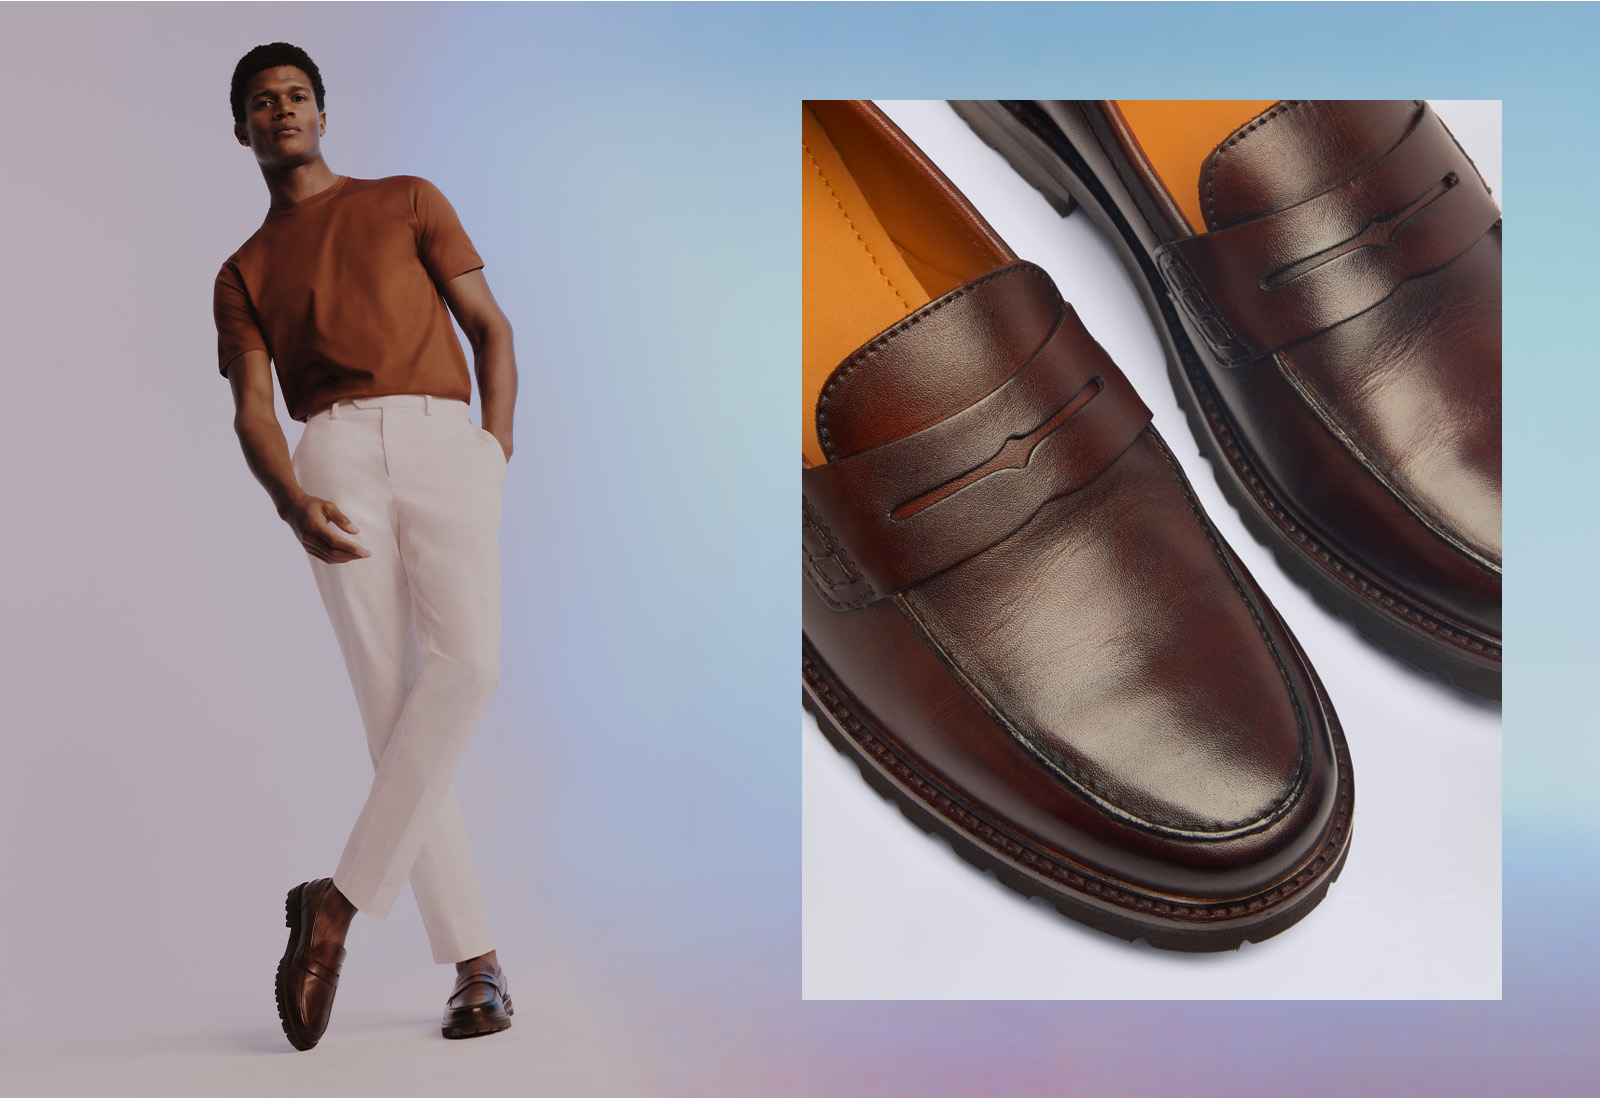 A smart casual look and brown leather loafers.